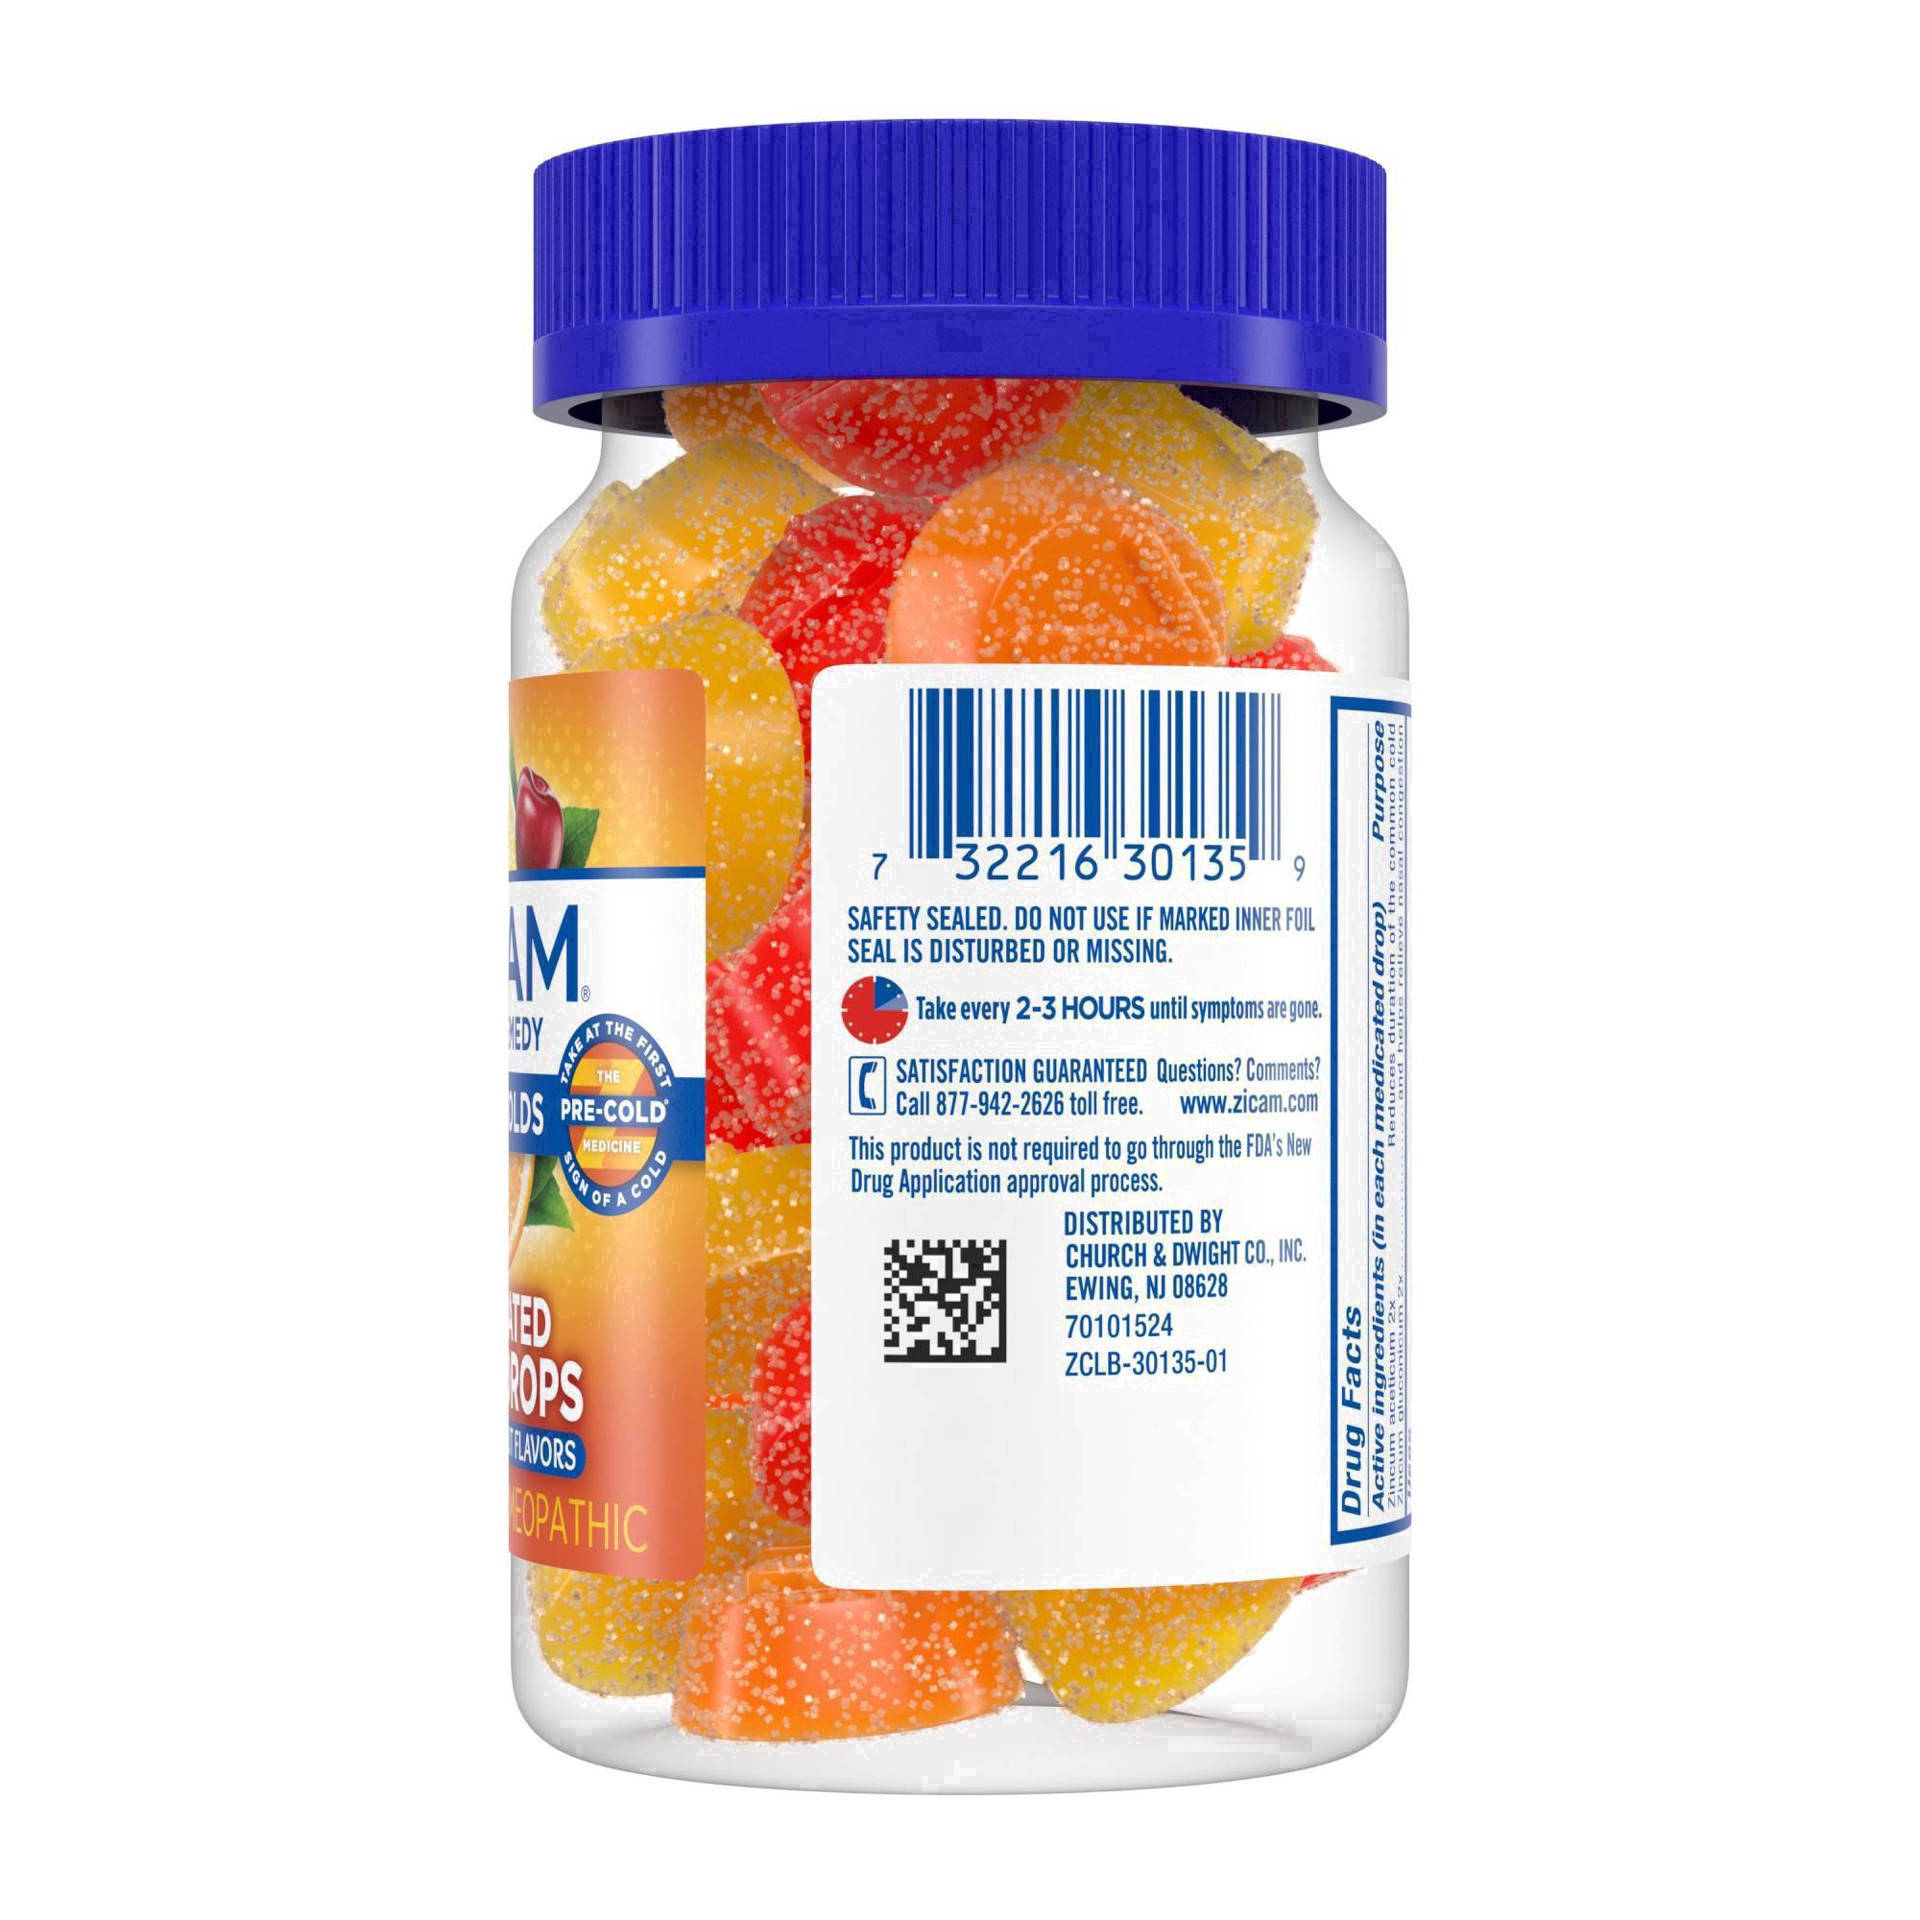 slide 12 of 58, Zicam Cold Remedy Medicated Drops - Fruit - 25ct, 25 ct